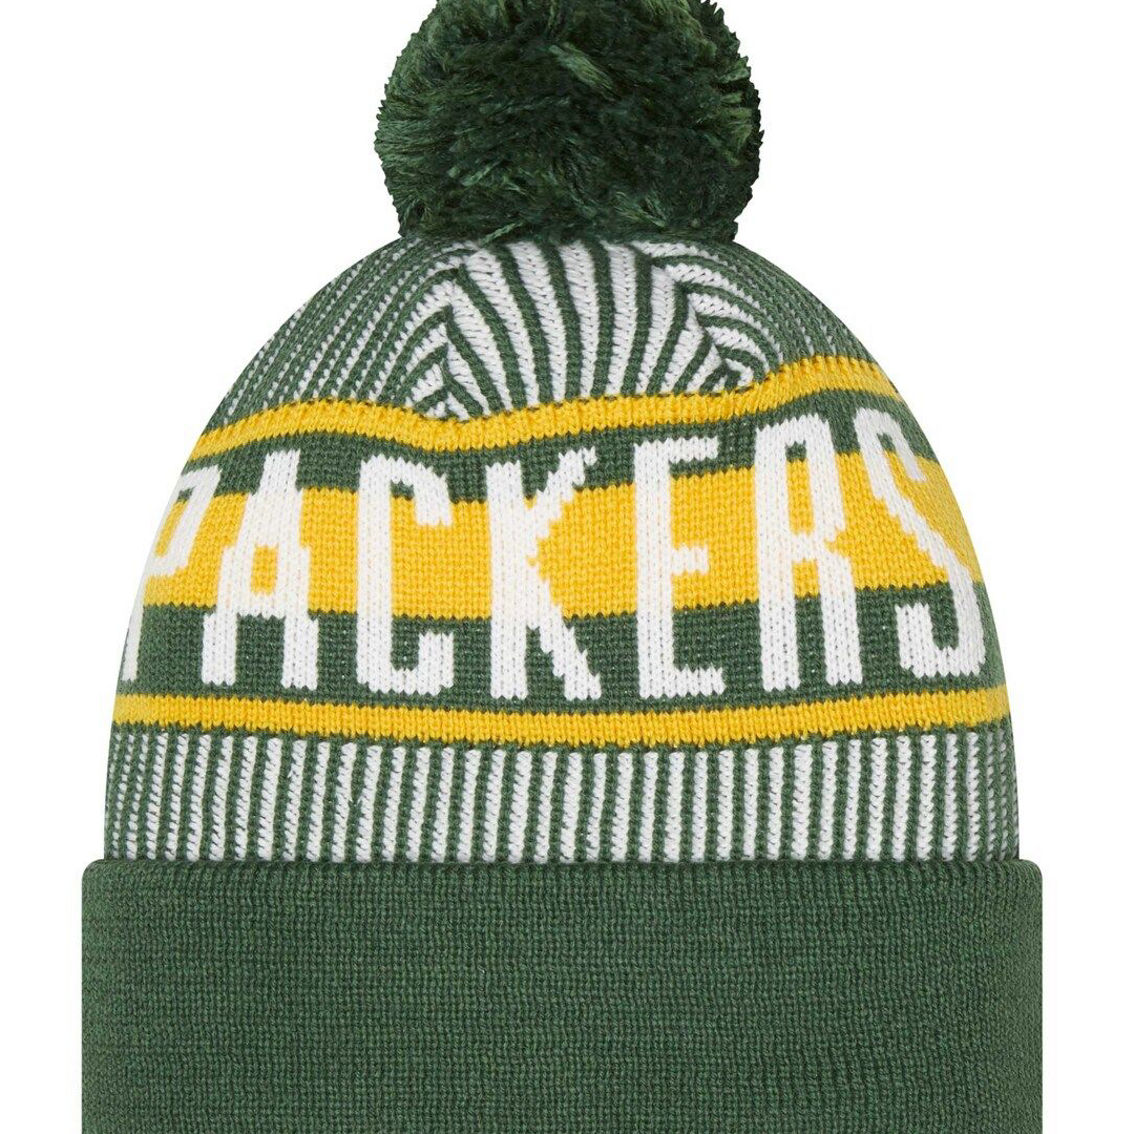 New Era Men's Green Green Bay Packers Striped Cuffed Knit Hat with Pom - Image 3 of 3